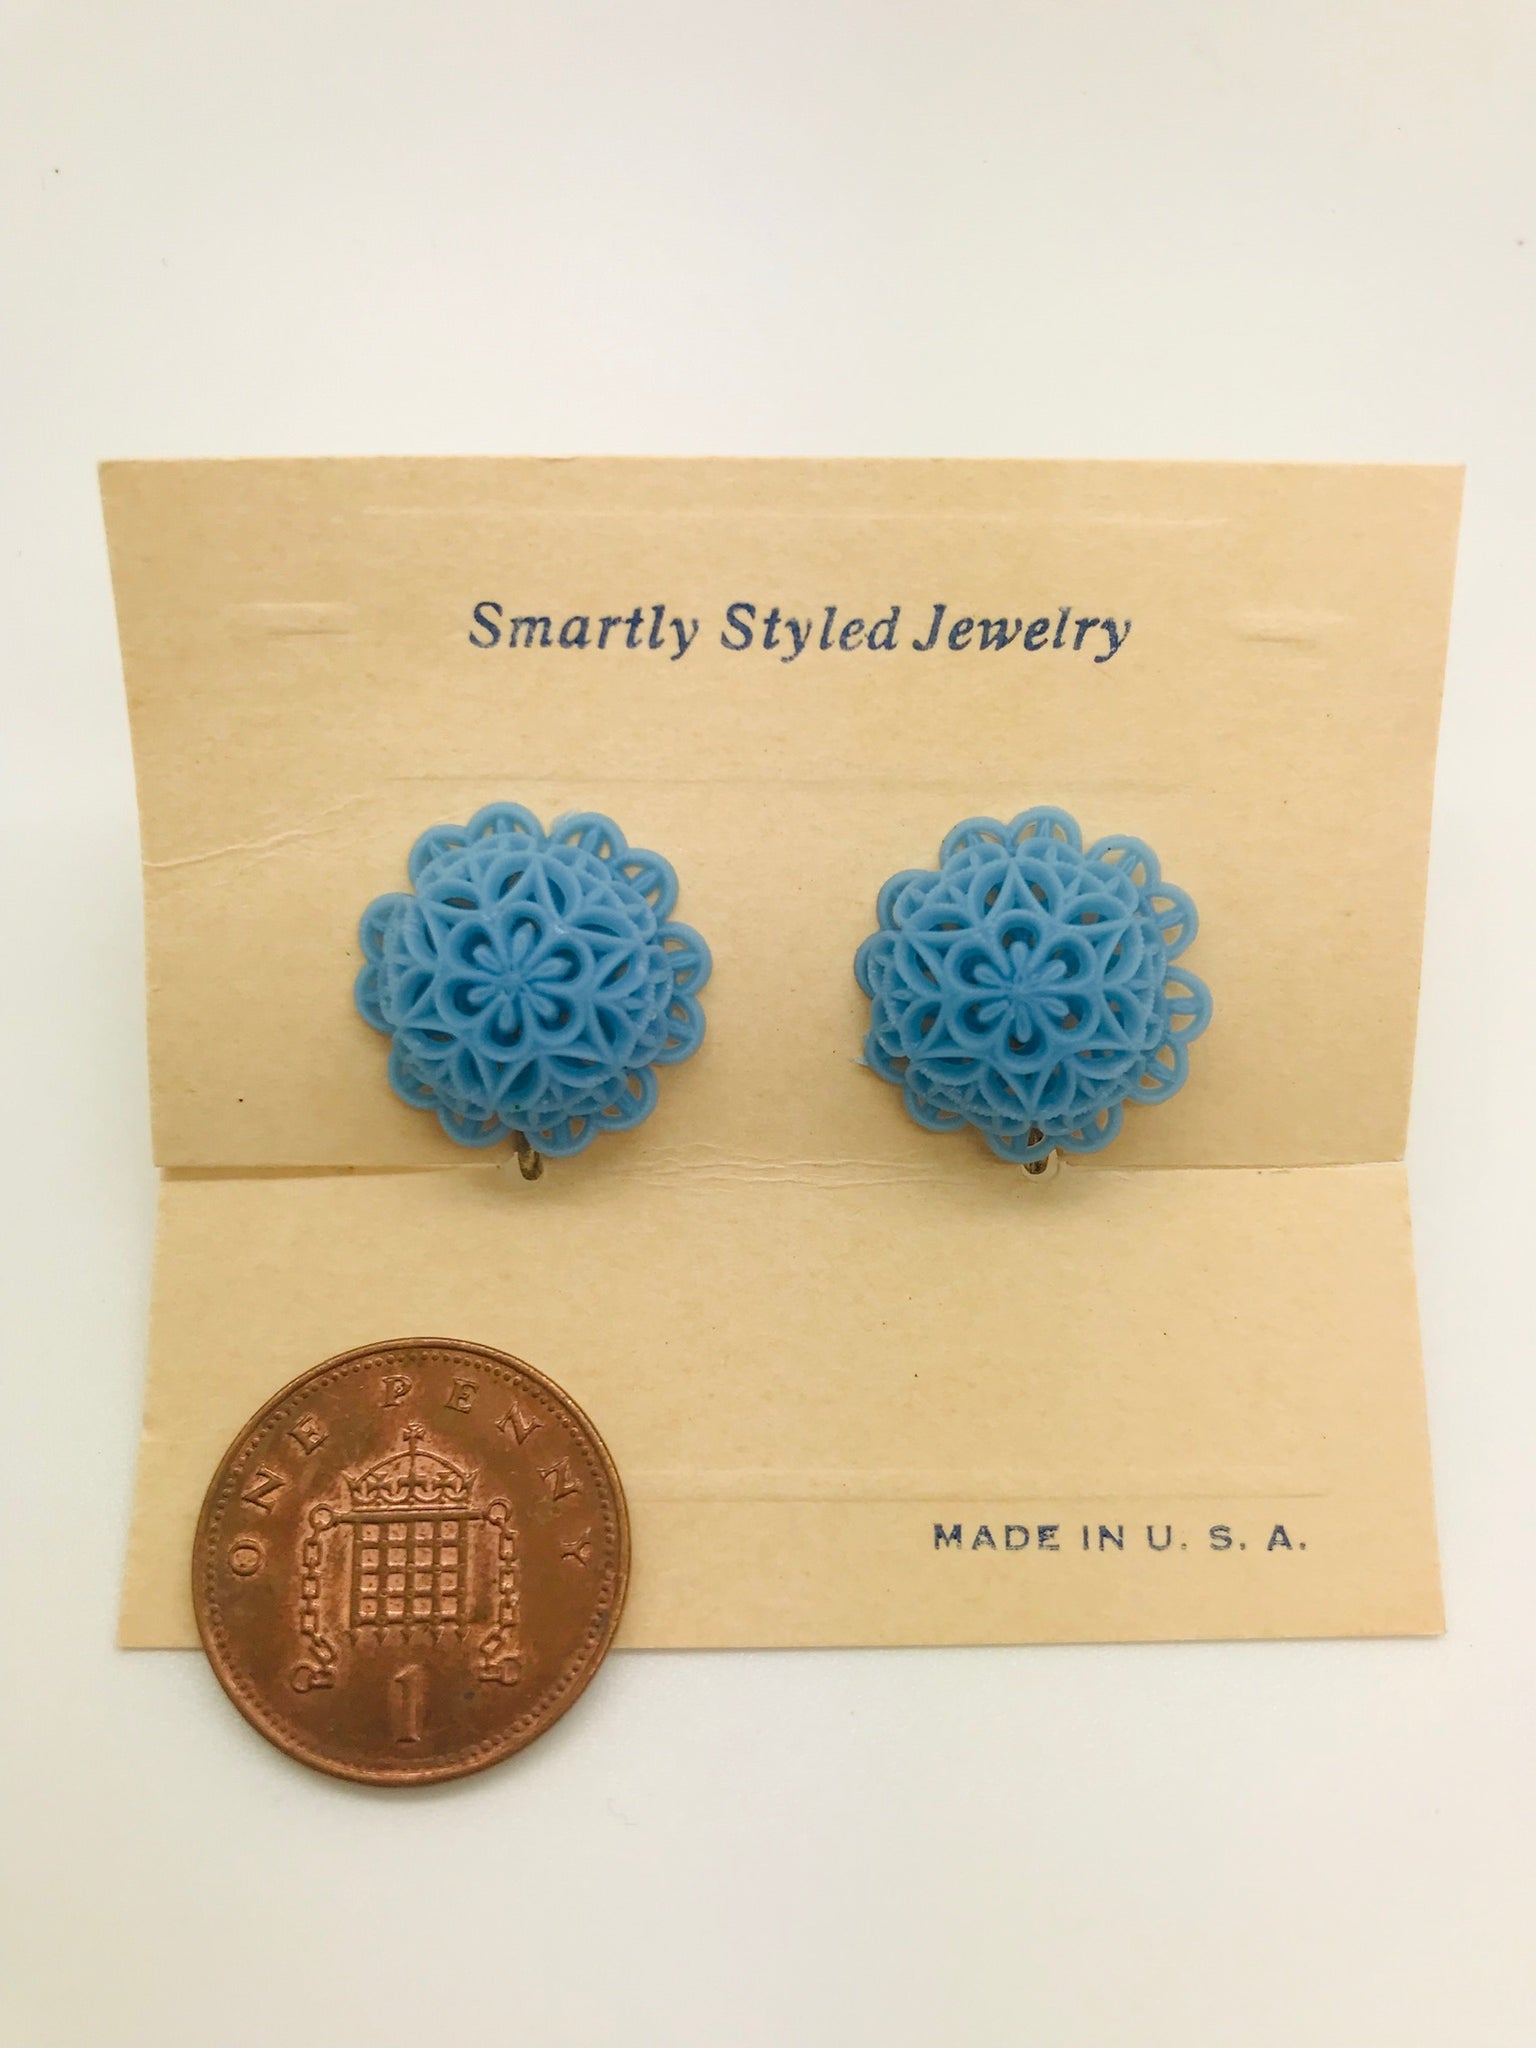 Authentic Vintage 1940s-50s Screw Back Dome Earrings in Blue Floral Lace Acrylic Resin by The Schein Brothers - CC41, Goodwood Revival, Twinwood Festival, Viva Las Vegas Rockabilly Weekend Rock n Romance Rock n Romance